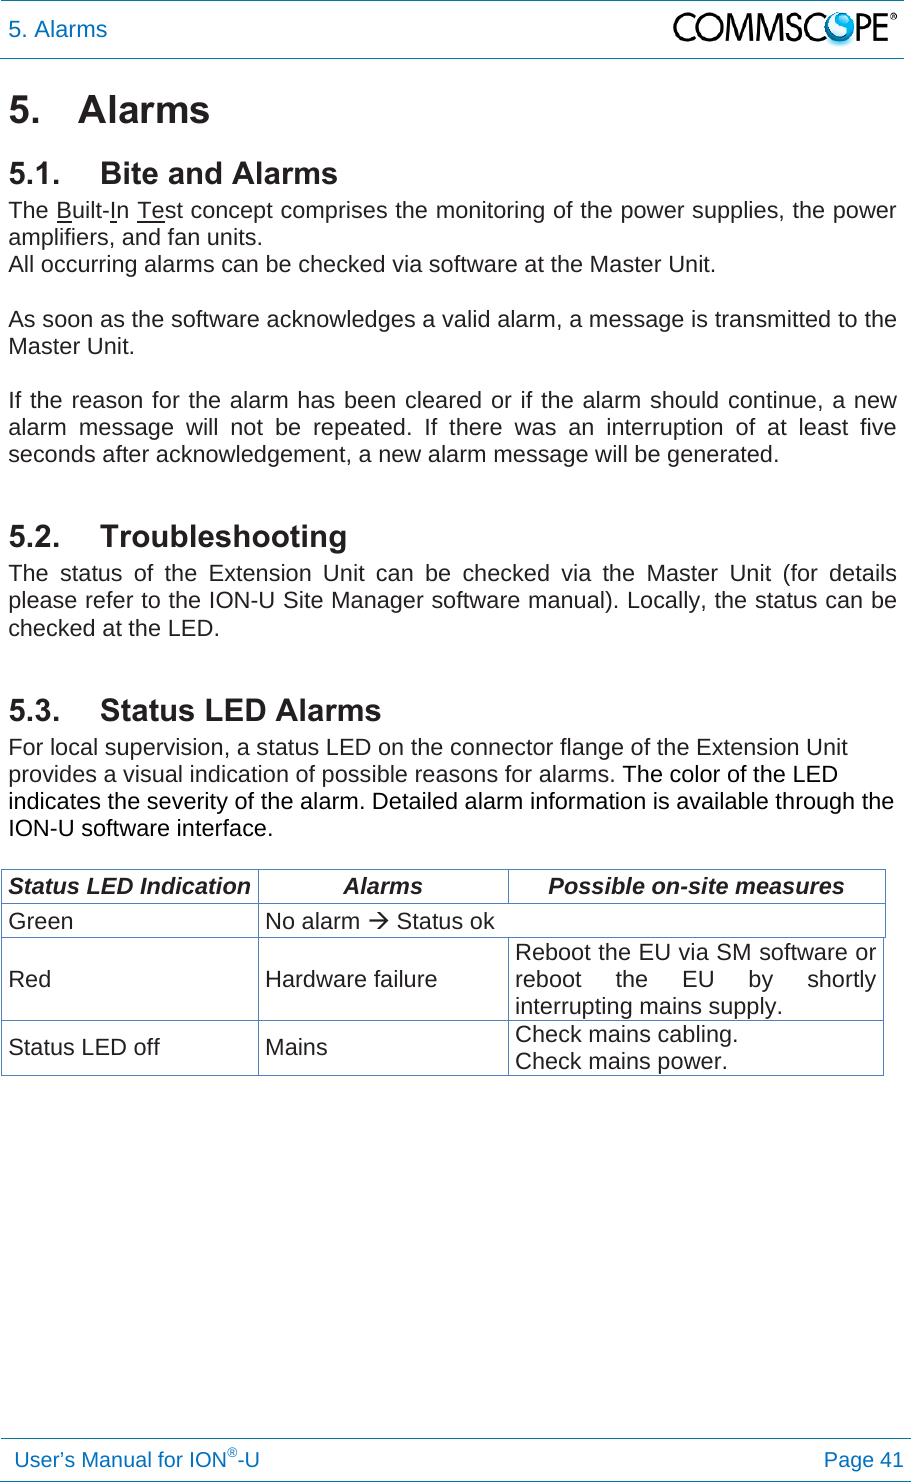 5. Alarms   User’s Manual for ION®-U Page 41 5. Alarms 5.1. Bite and Alarms The Built-In Test concept comprises the monitoring of the power supplies, the power amplifiers, and fan units. All occurring alarms can be checked via software at the Master Unit.  As soon as the software acknowledges a valid alarm, a message is transmitted to the Master Unit.  If the reason for the alarm has been cleared or if the alarm should continue, a new alarm message will not be repeated. If there was an interruption of at least five seconds after acknowledgement, a new alarm message will be generated.  5.2. Troubleshooting The status of the Extension Unit can be checked via the Master Unit (for details please refer to the ION-U Site Manager software manual). Locally, the status can be checked at the LED.  5.3. Status LED Alarms For local supervision, a status LED on the connector flange of the Extension Unit provides a visual indication of possible reasons for alarms. The color of the LED indicates the severity of the alarm. Detailed alarm information is available through the ION-U software interface.  Status LED Indication  Alarms  Possible on-site measures Green No alarm  Status ok Red Hardware failure Reboot the EU via SM software or reboot the EU by shortly interrupting mains supply. Status LED off  Mains  Check mains cabling. Check mains power.    